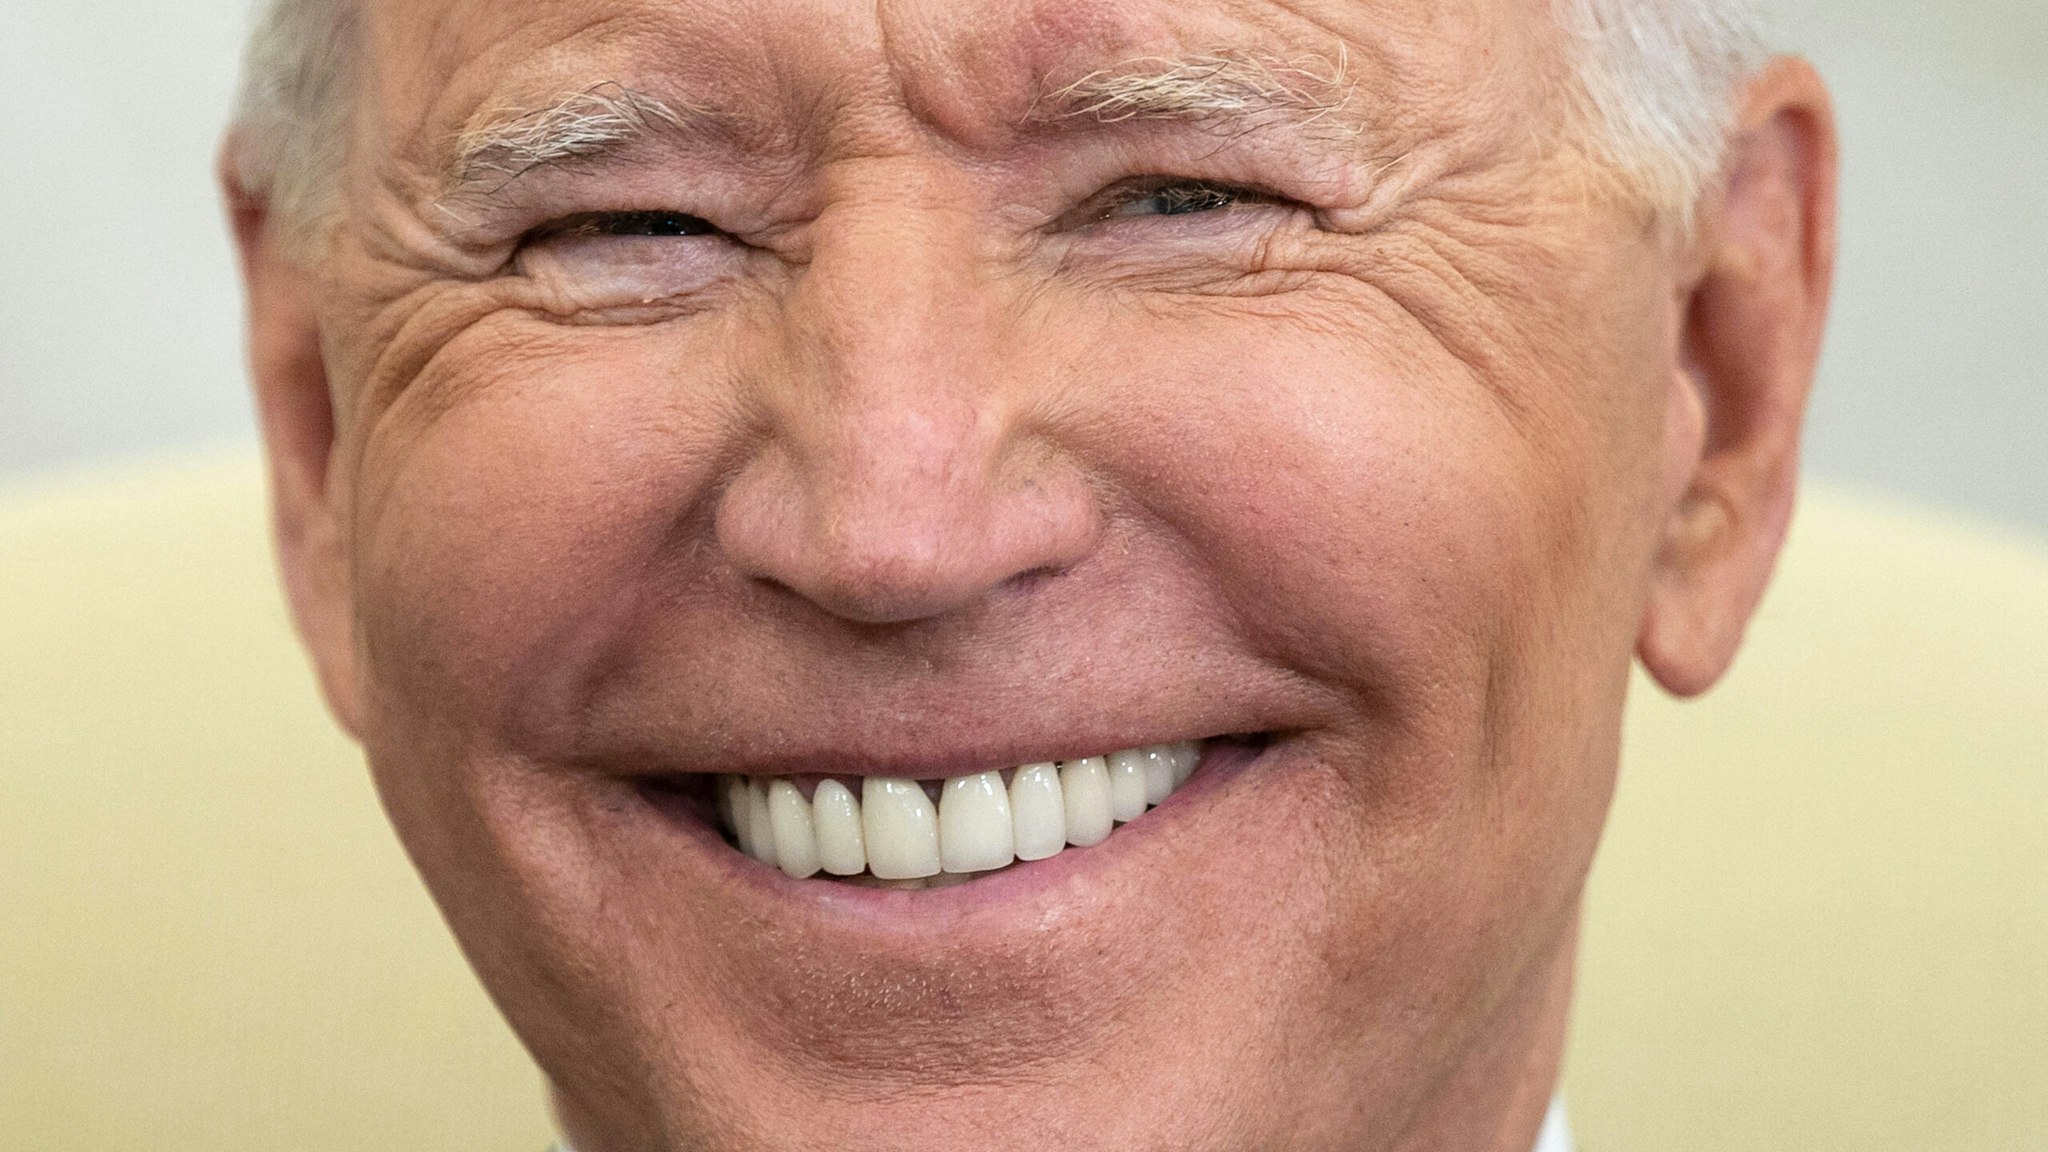 TOPSHOT - US President Joe Biden smiles during a meeting with Indian Prime Minister Narendra Modi in the Oval Office of the White House on September 24, 2021, in Washington, DC.